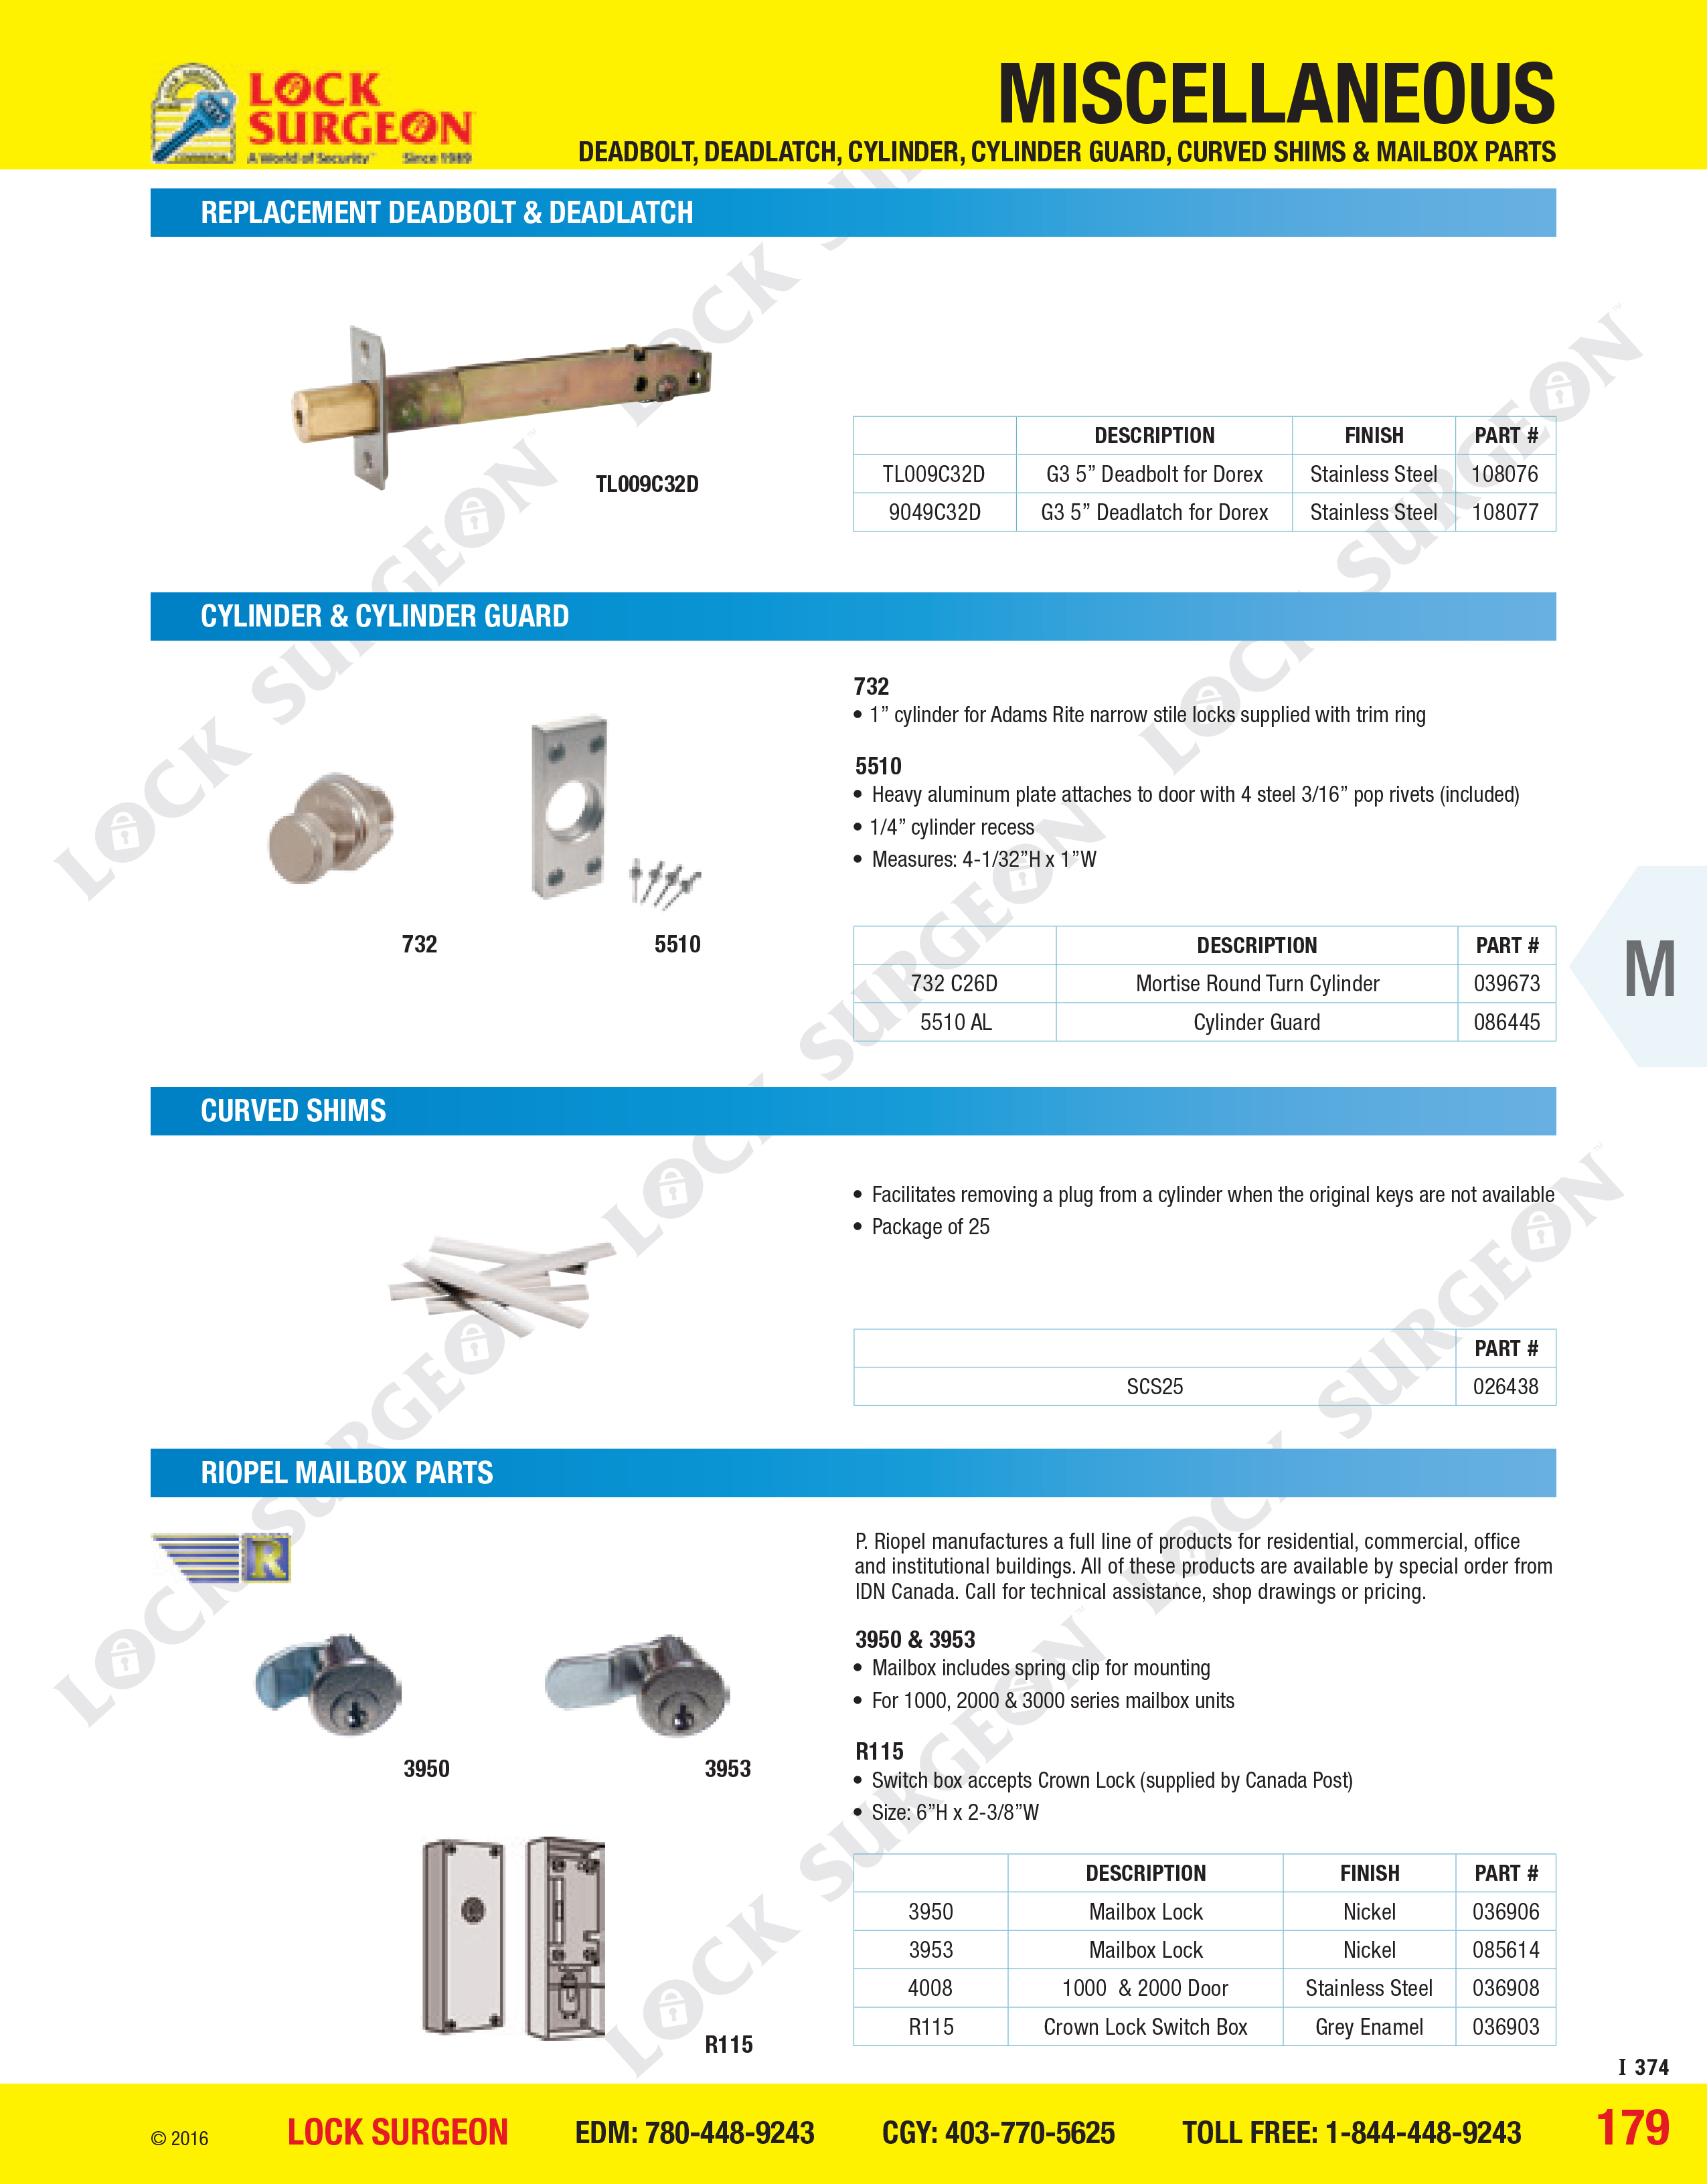 deadbolt deadlatch cylinder-guard curved shims and mailbox parts.